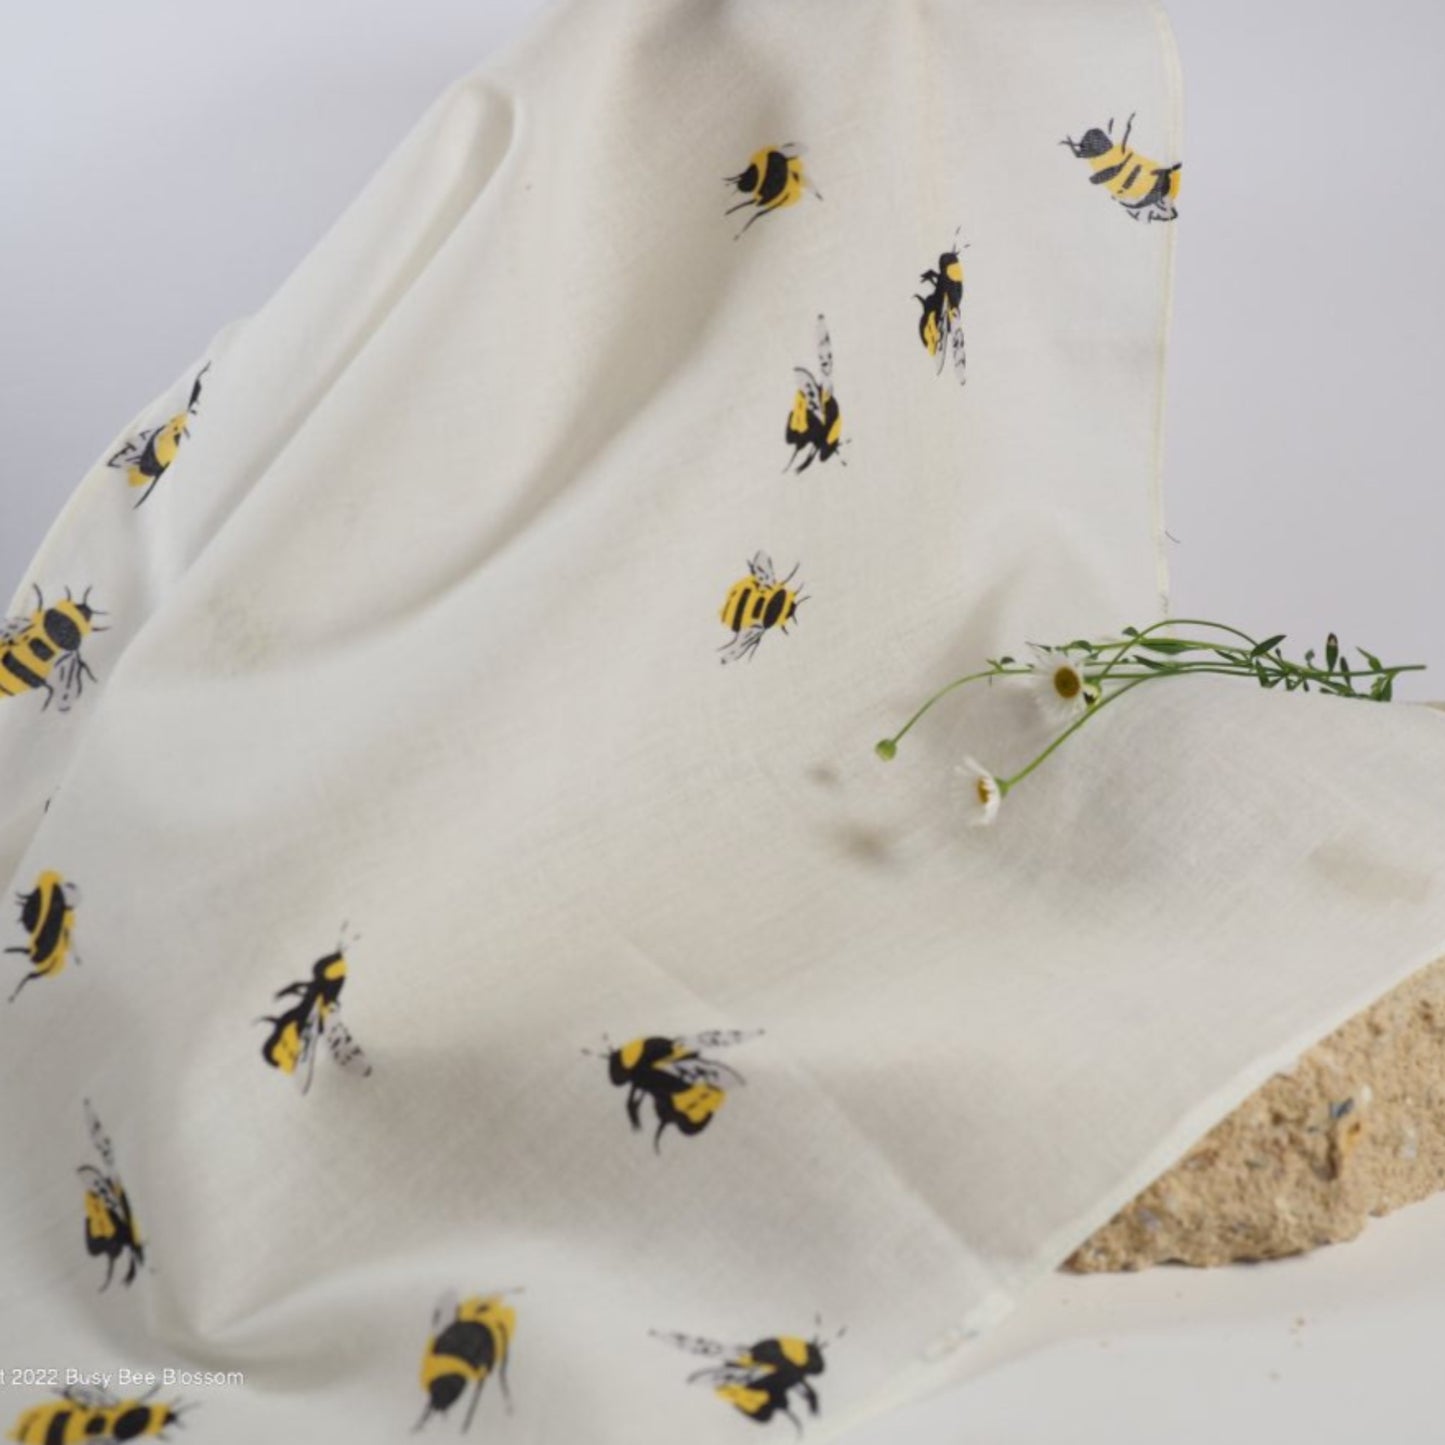 Cotton muslin face cloth with bees buzzing design